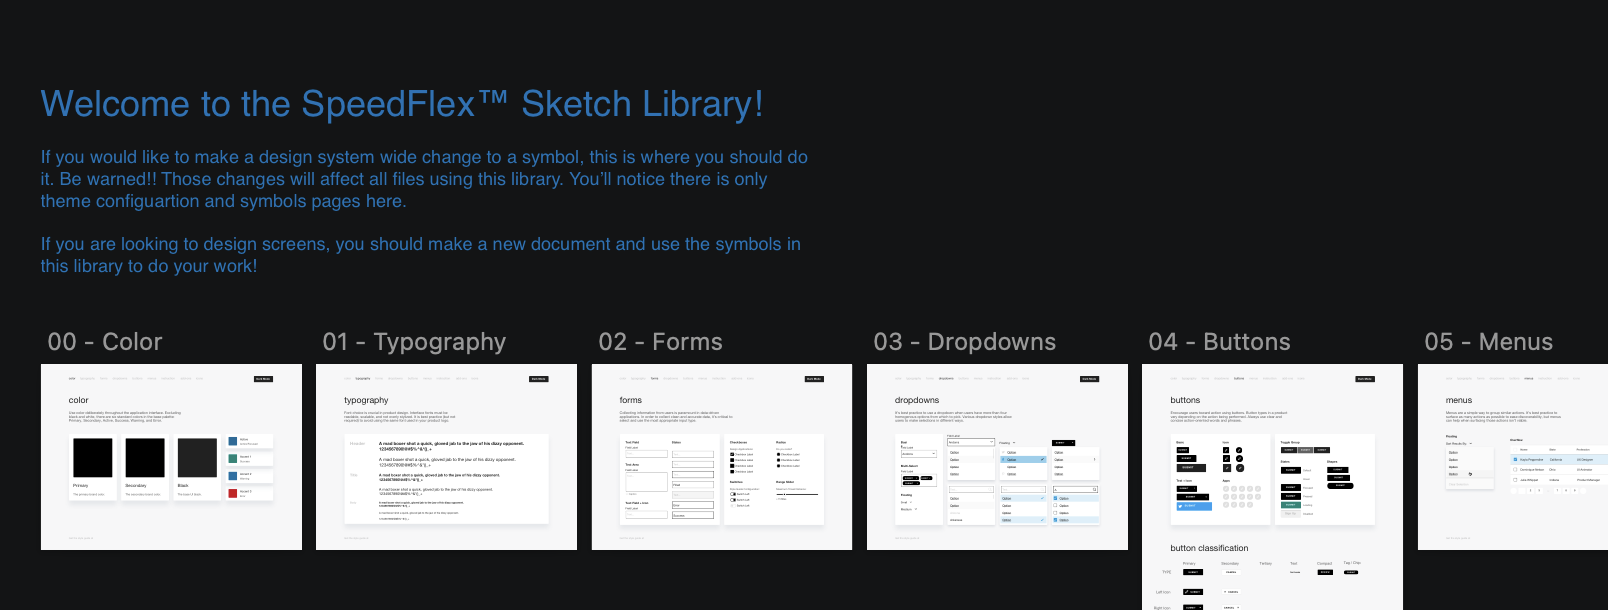 Our Sketch Library